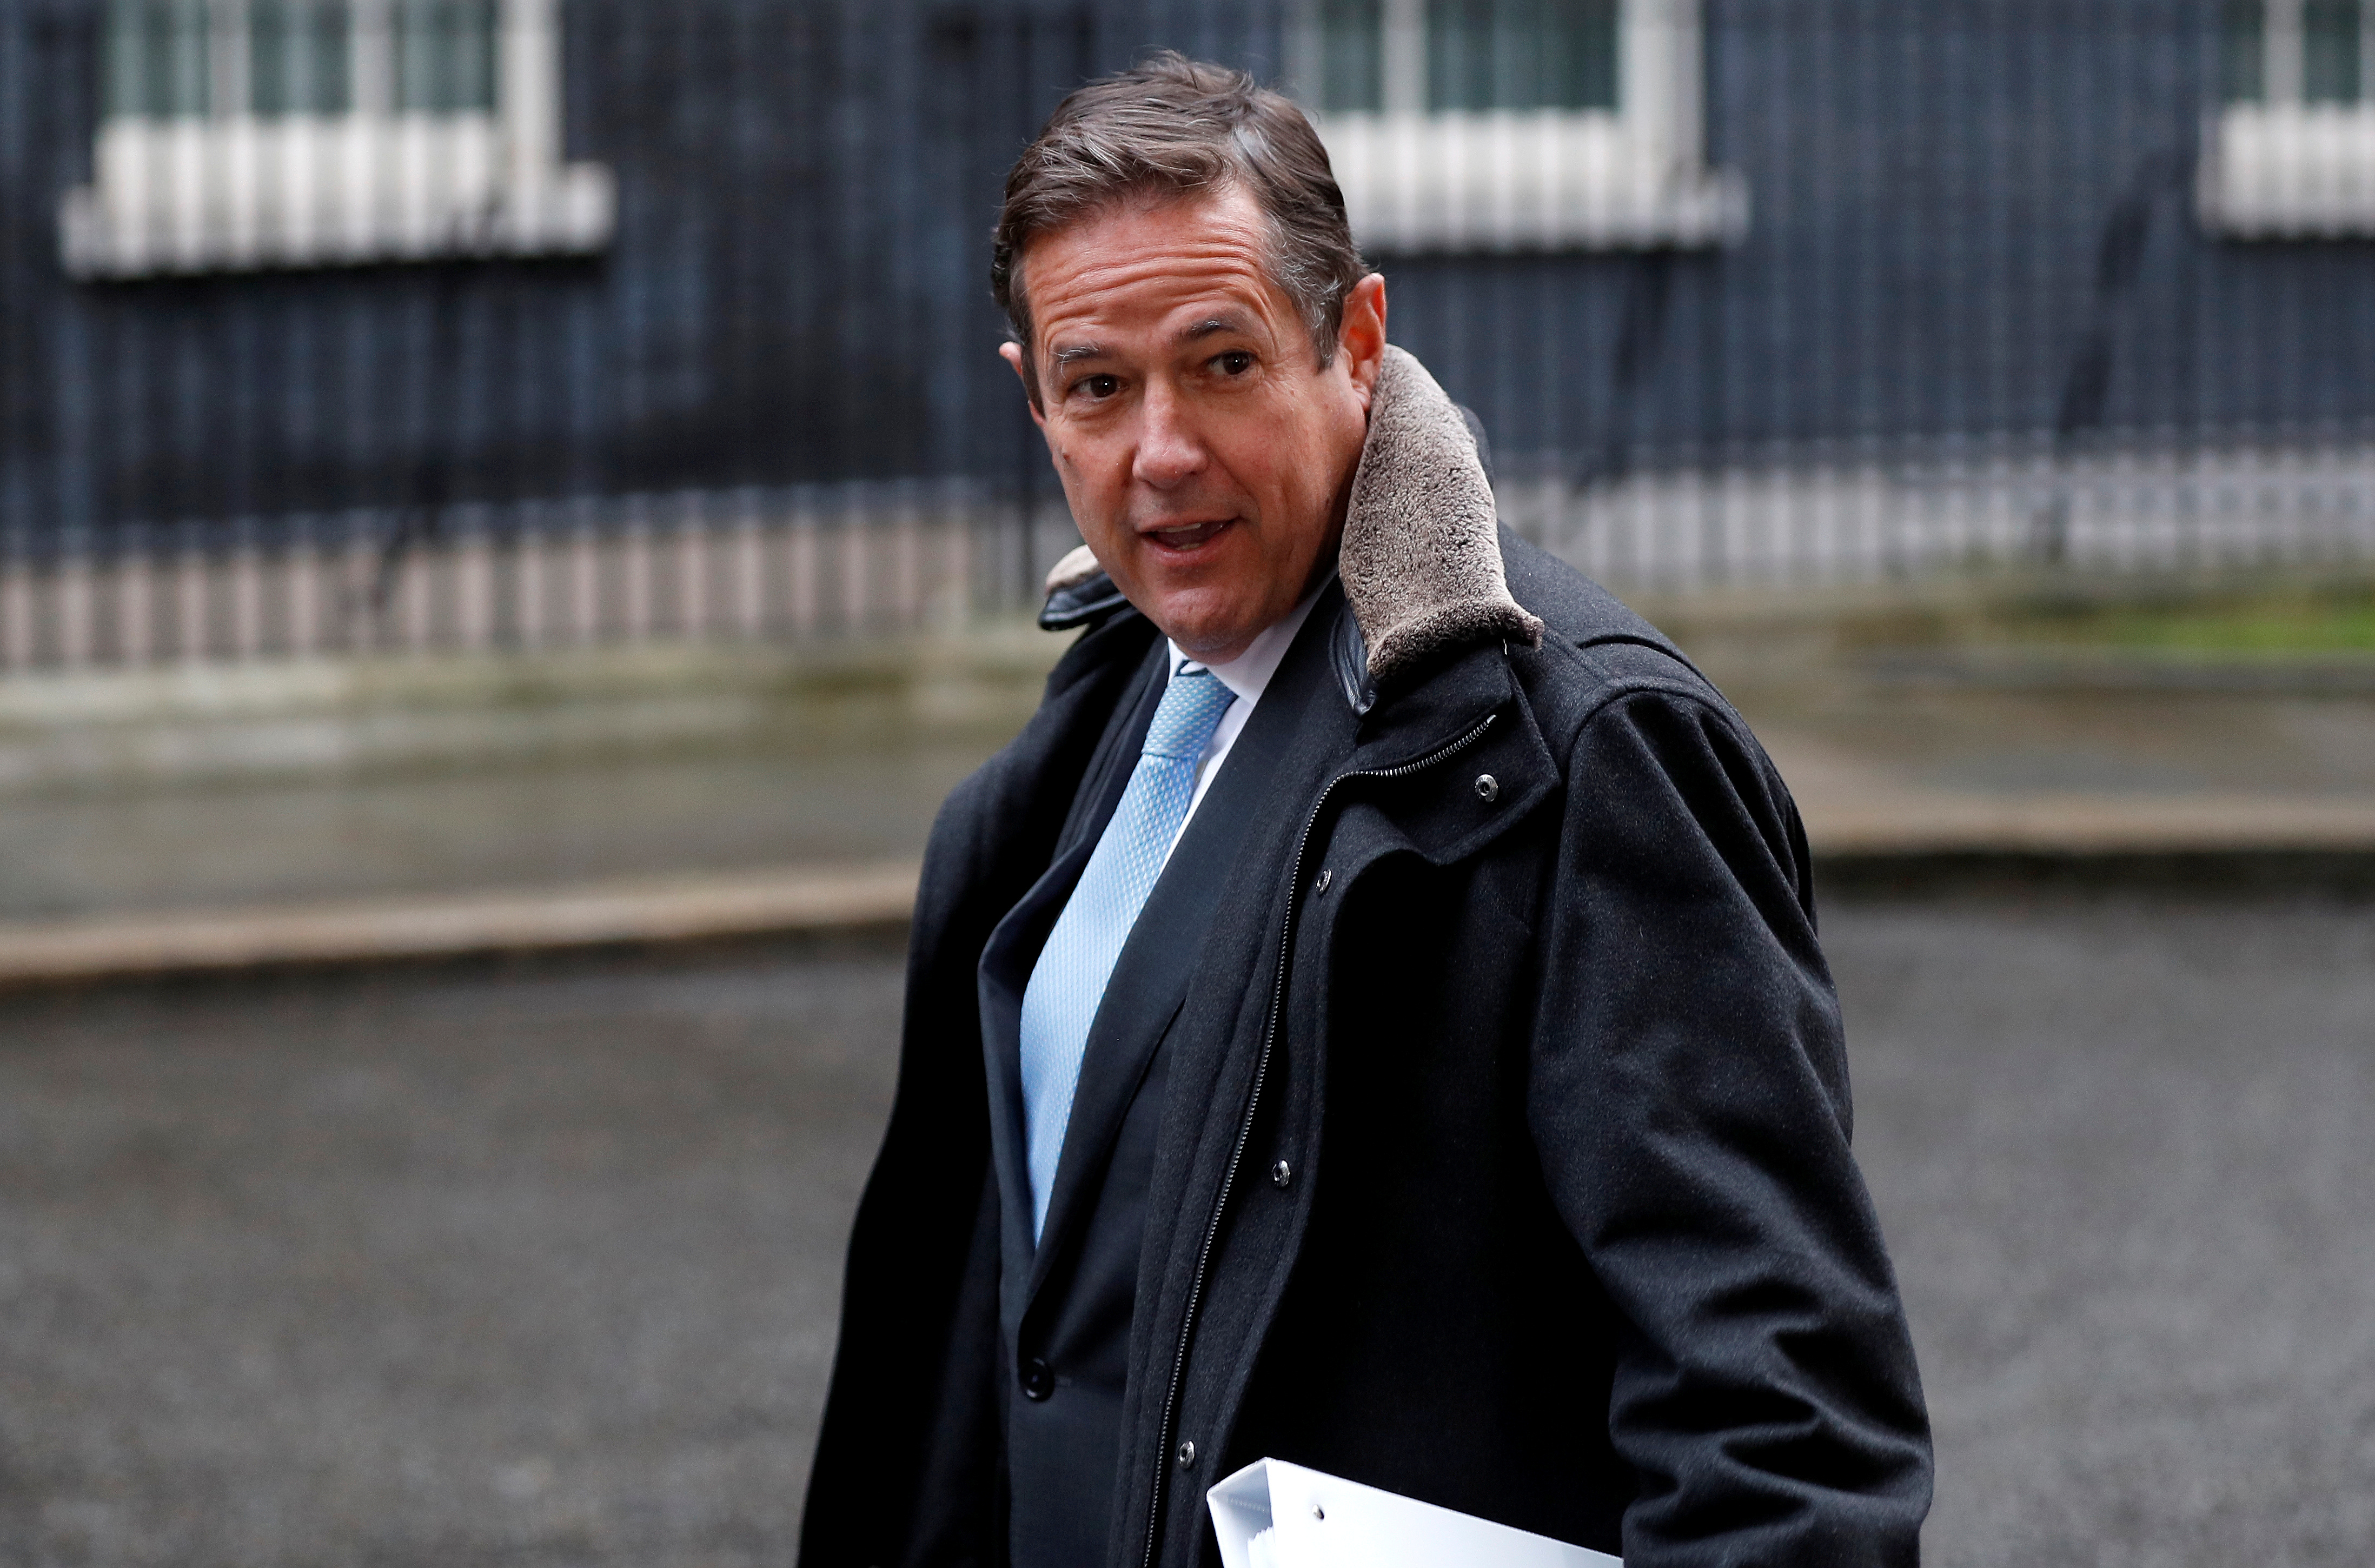 Barclays' CEO Jes Staley arrives at 10 Downing Street in London, Britain january 11, 2018. REUTERS/Peter Nicholls